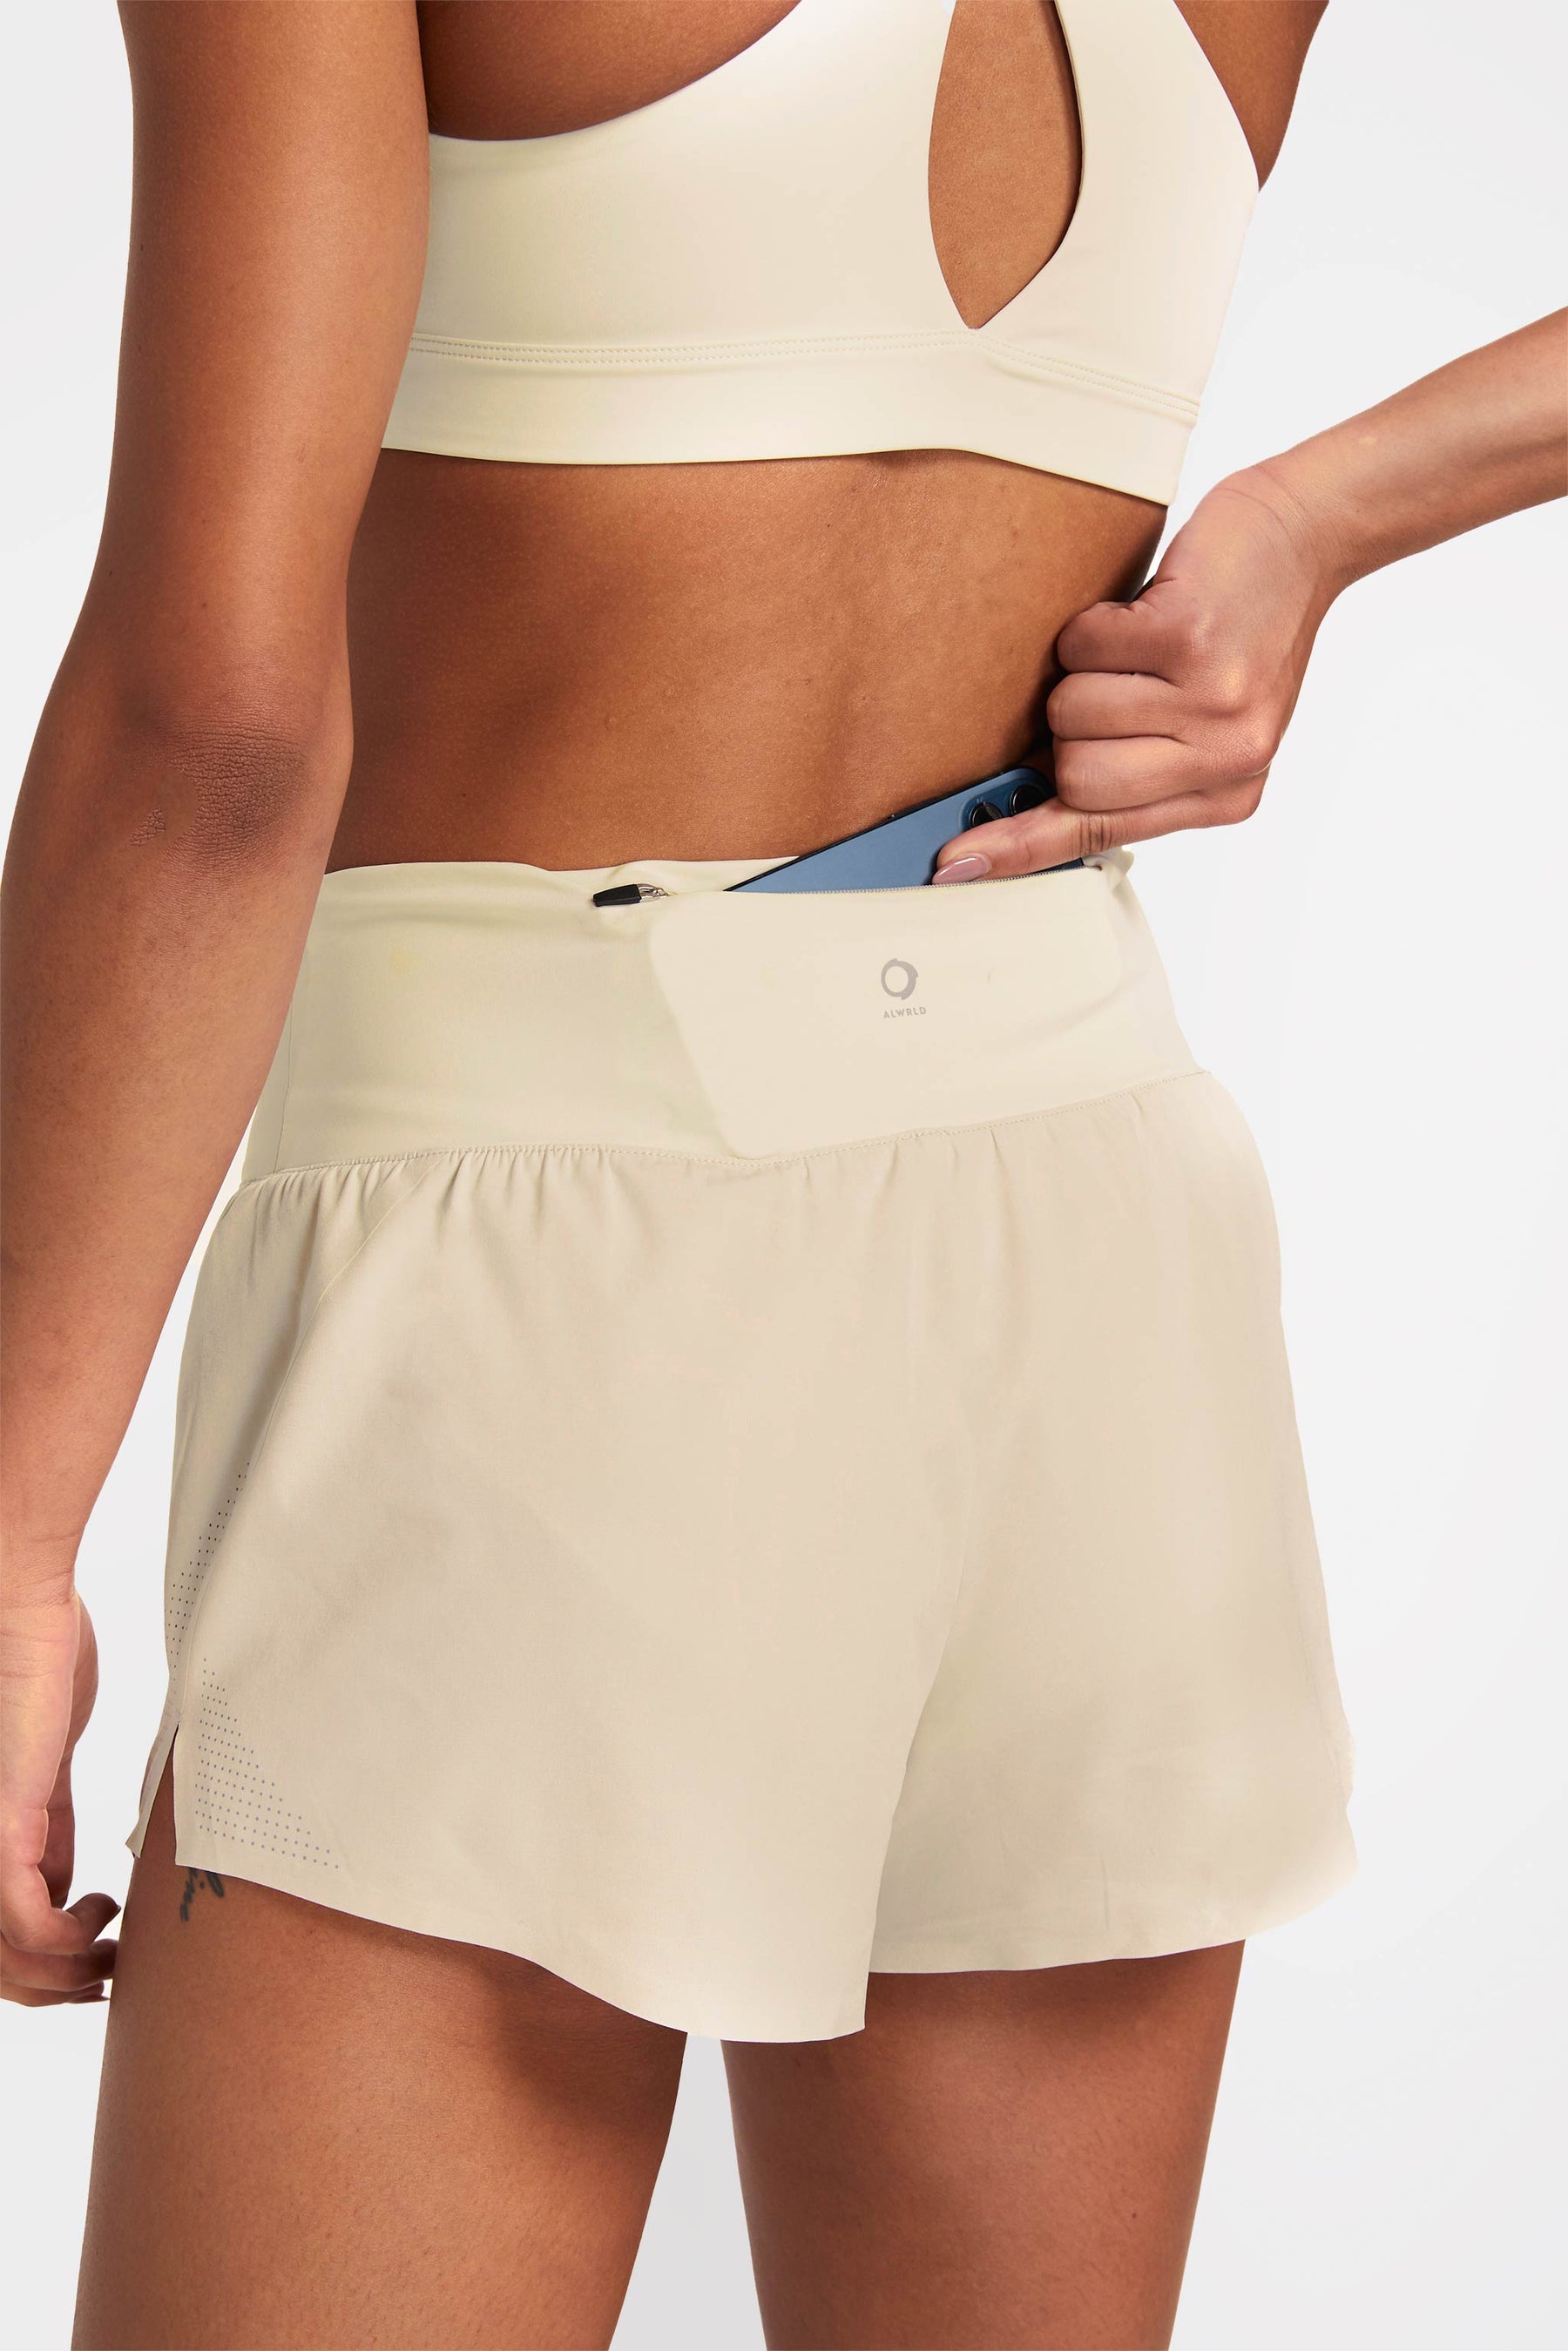 Back view of sustainable running shorts with hidden pocket